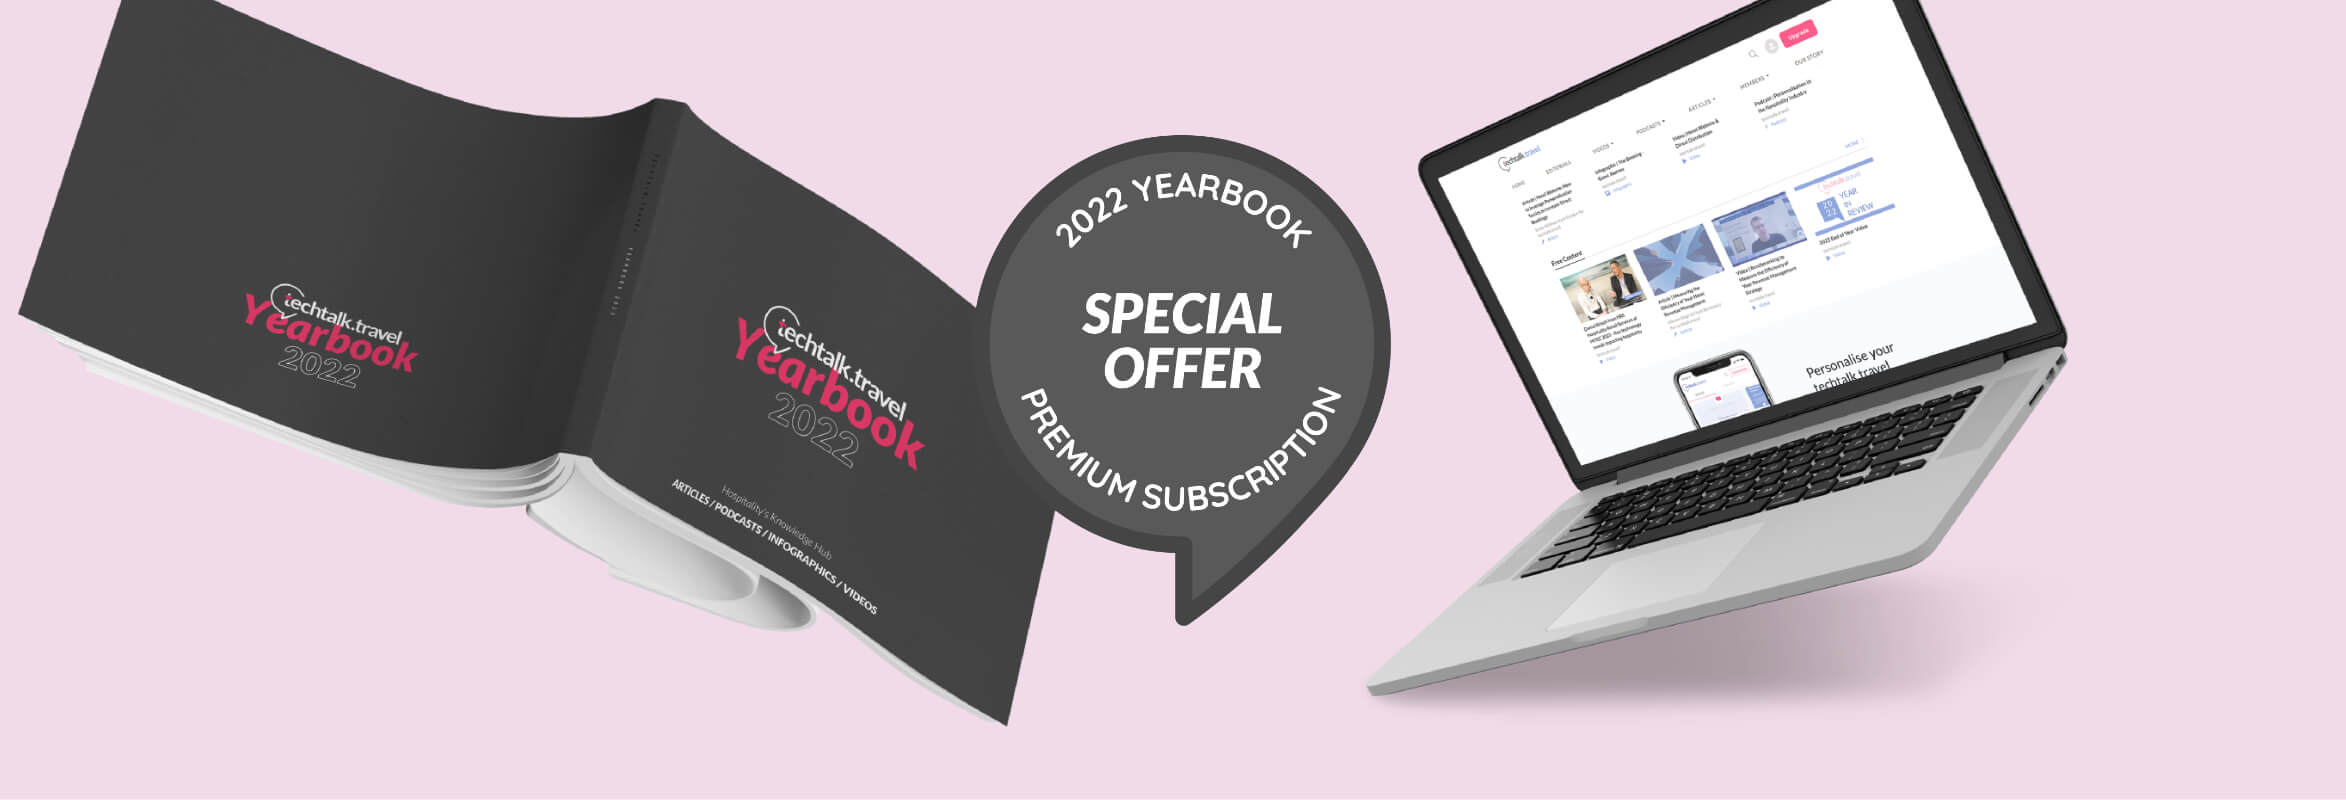 Special Offer - Yearbook 2022 - with Premium Subscription